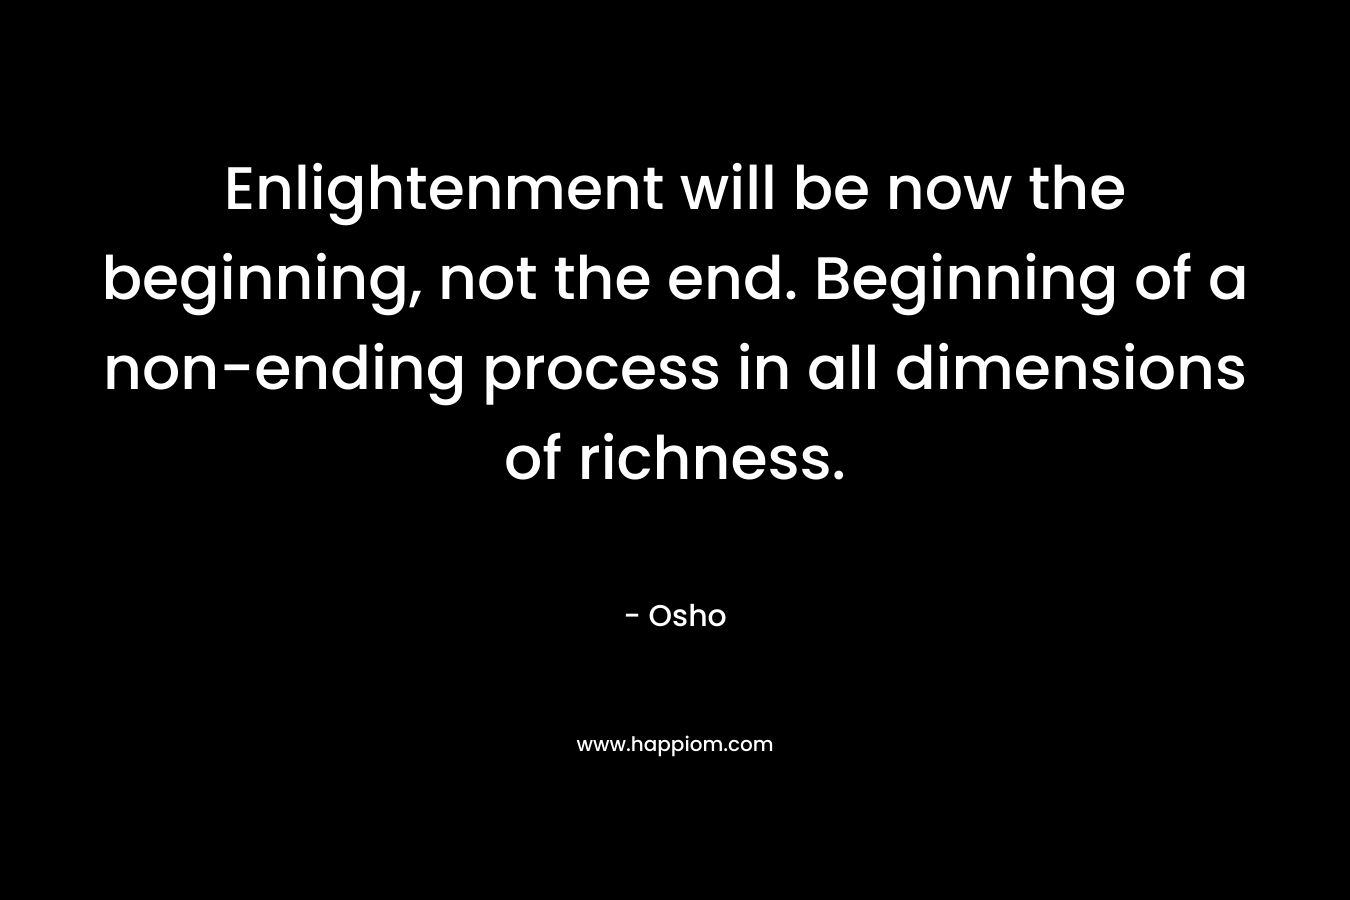 Enlightenment will be now the beginning, not the end. Beginning of a non-ending process in all dimensions of richness.  – Osho